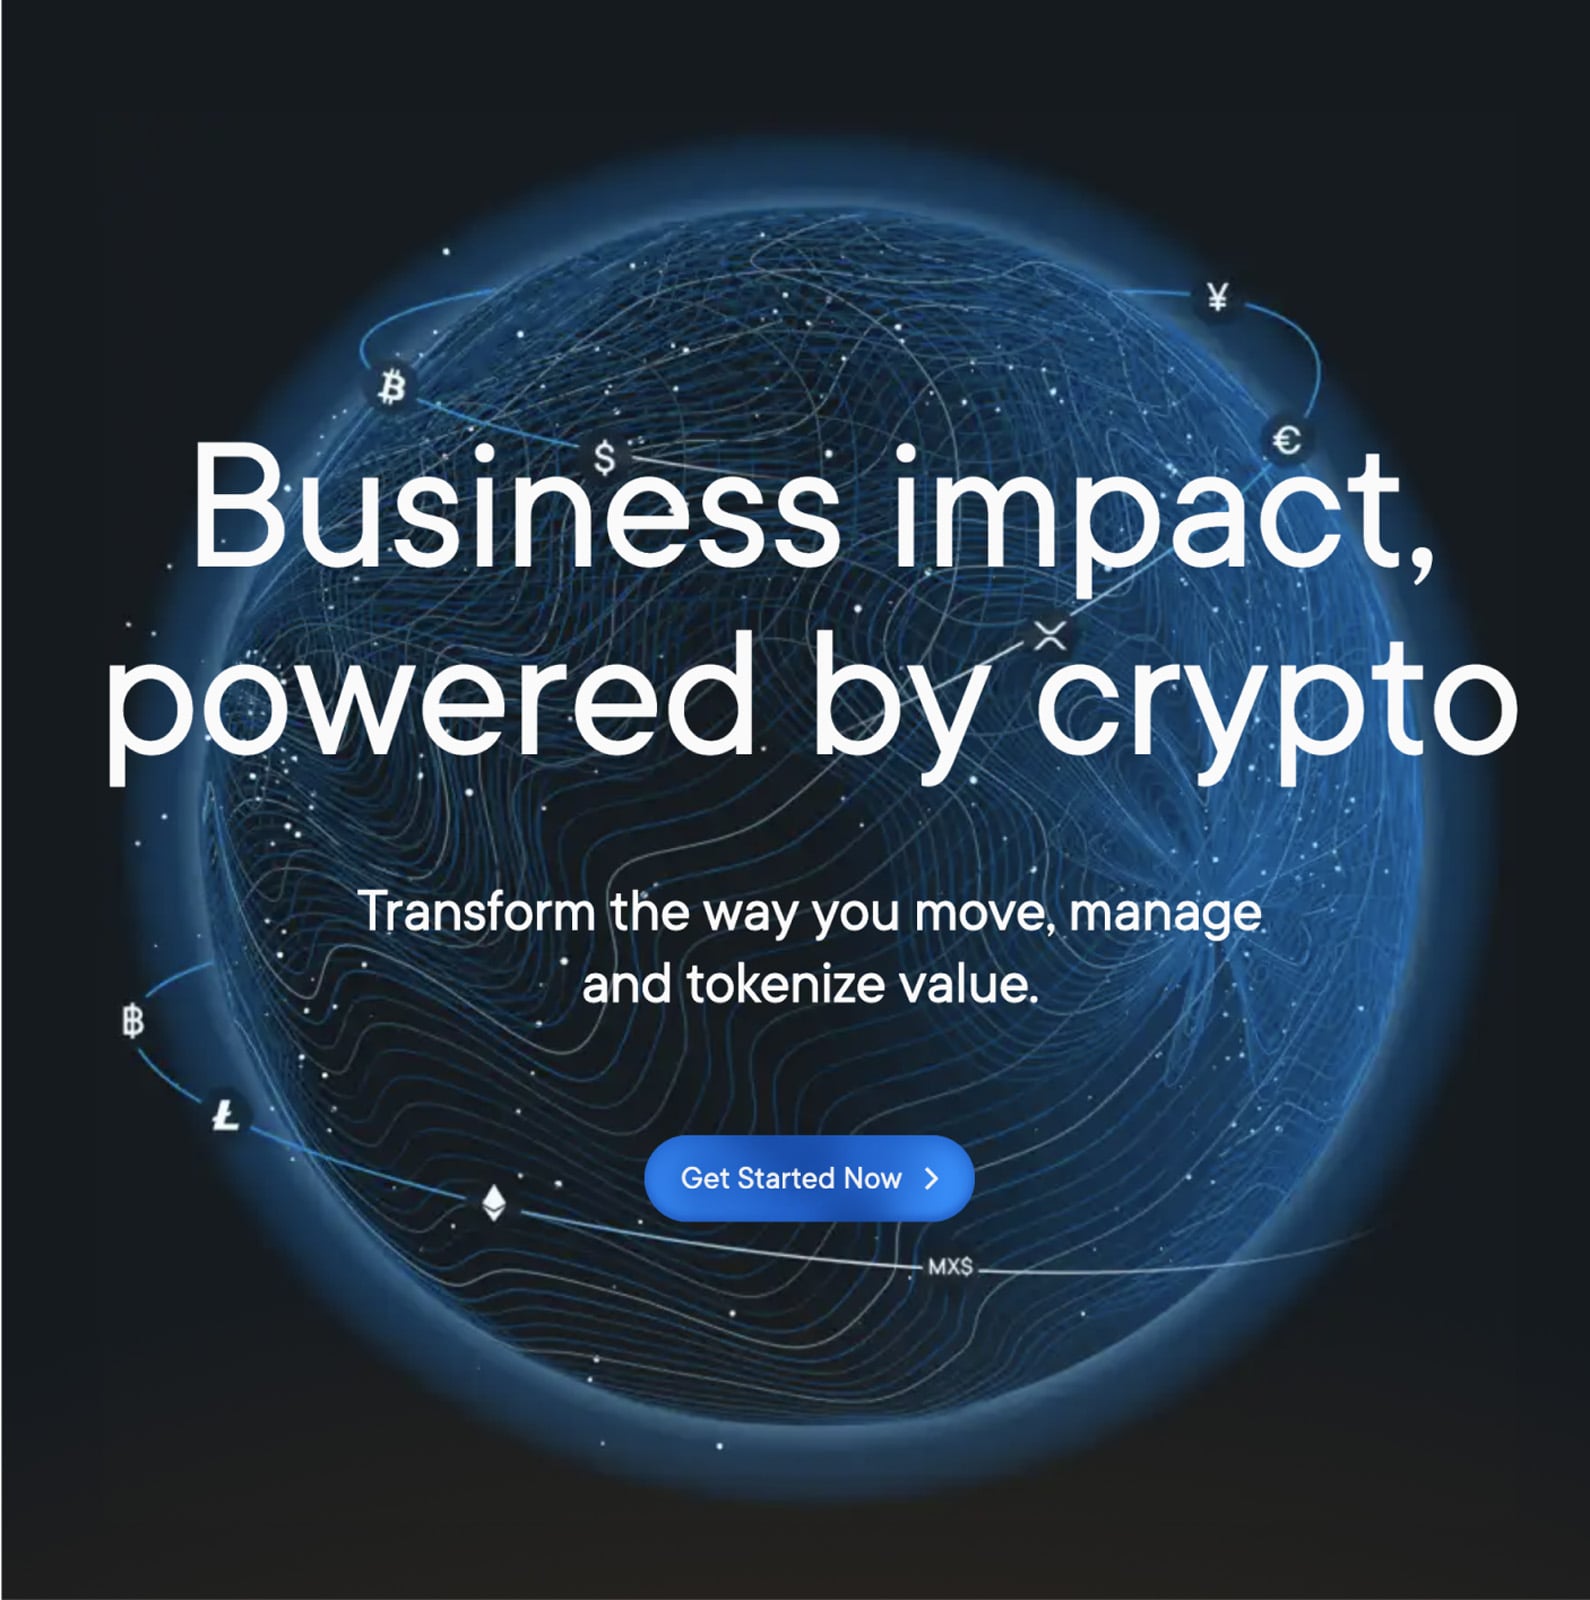 The business impact of Ripple, powered by crypto